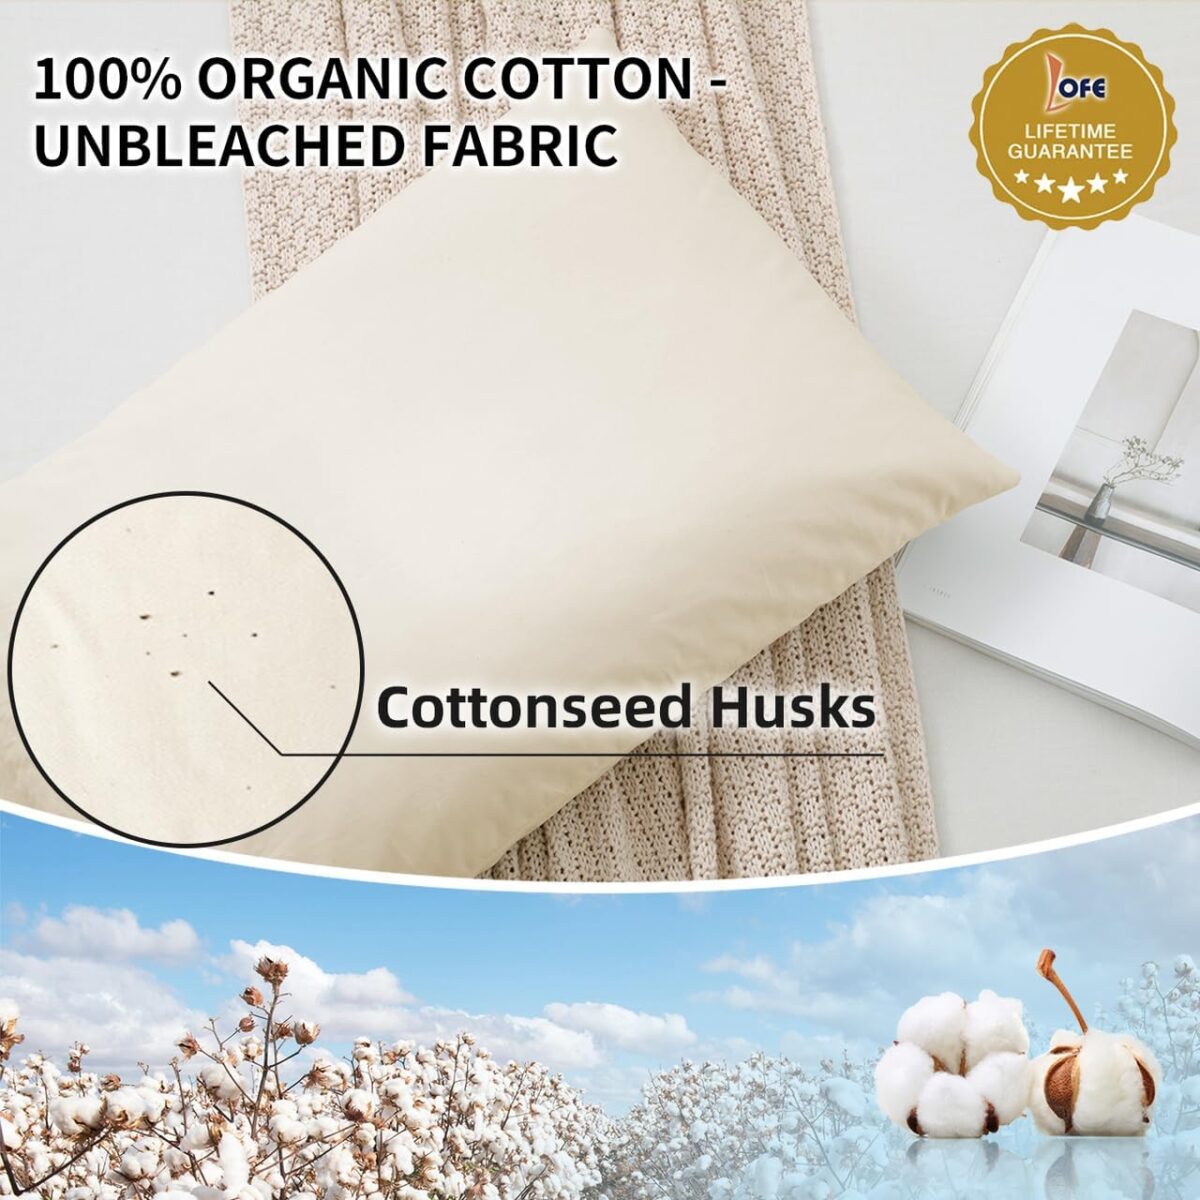 Organic Buckwheat Pillow for Sleeping - 14''x20'', Adjustable Loft, Breathable for Cool Sleep, Cervical Support for Back and Side Sleepers(Tartary Buckwheat Hulls)